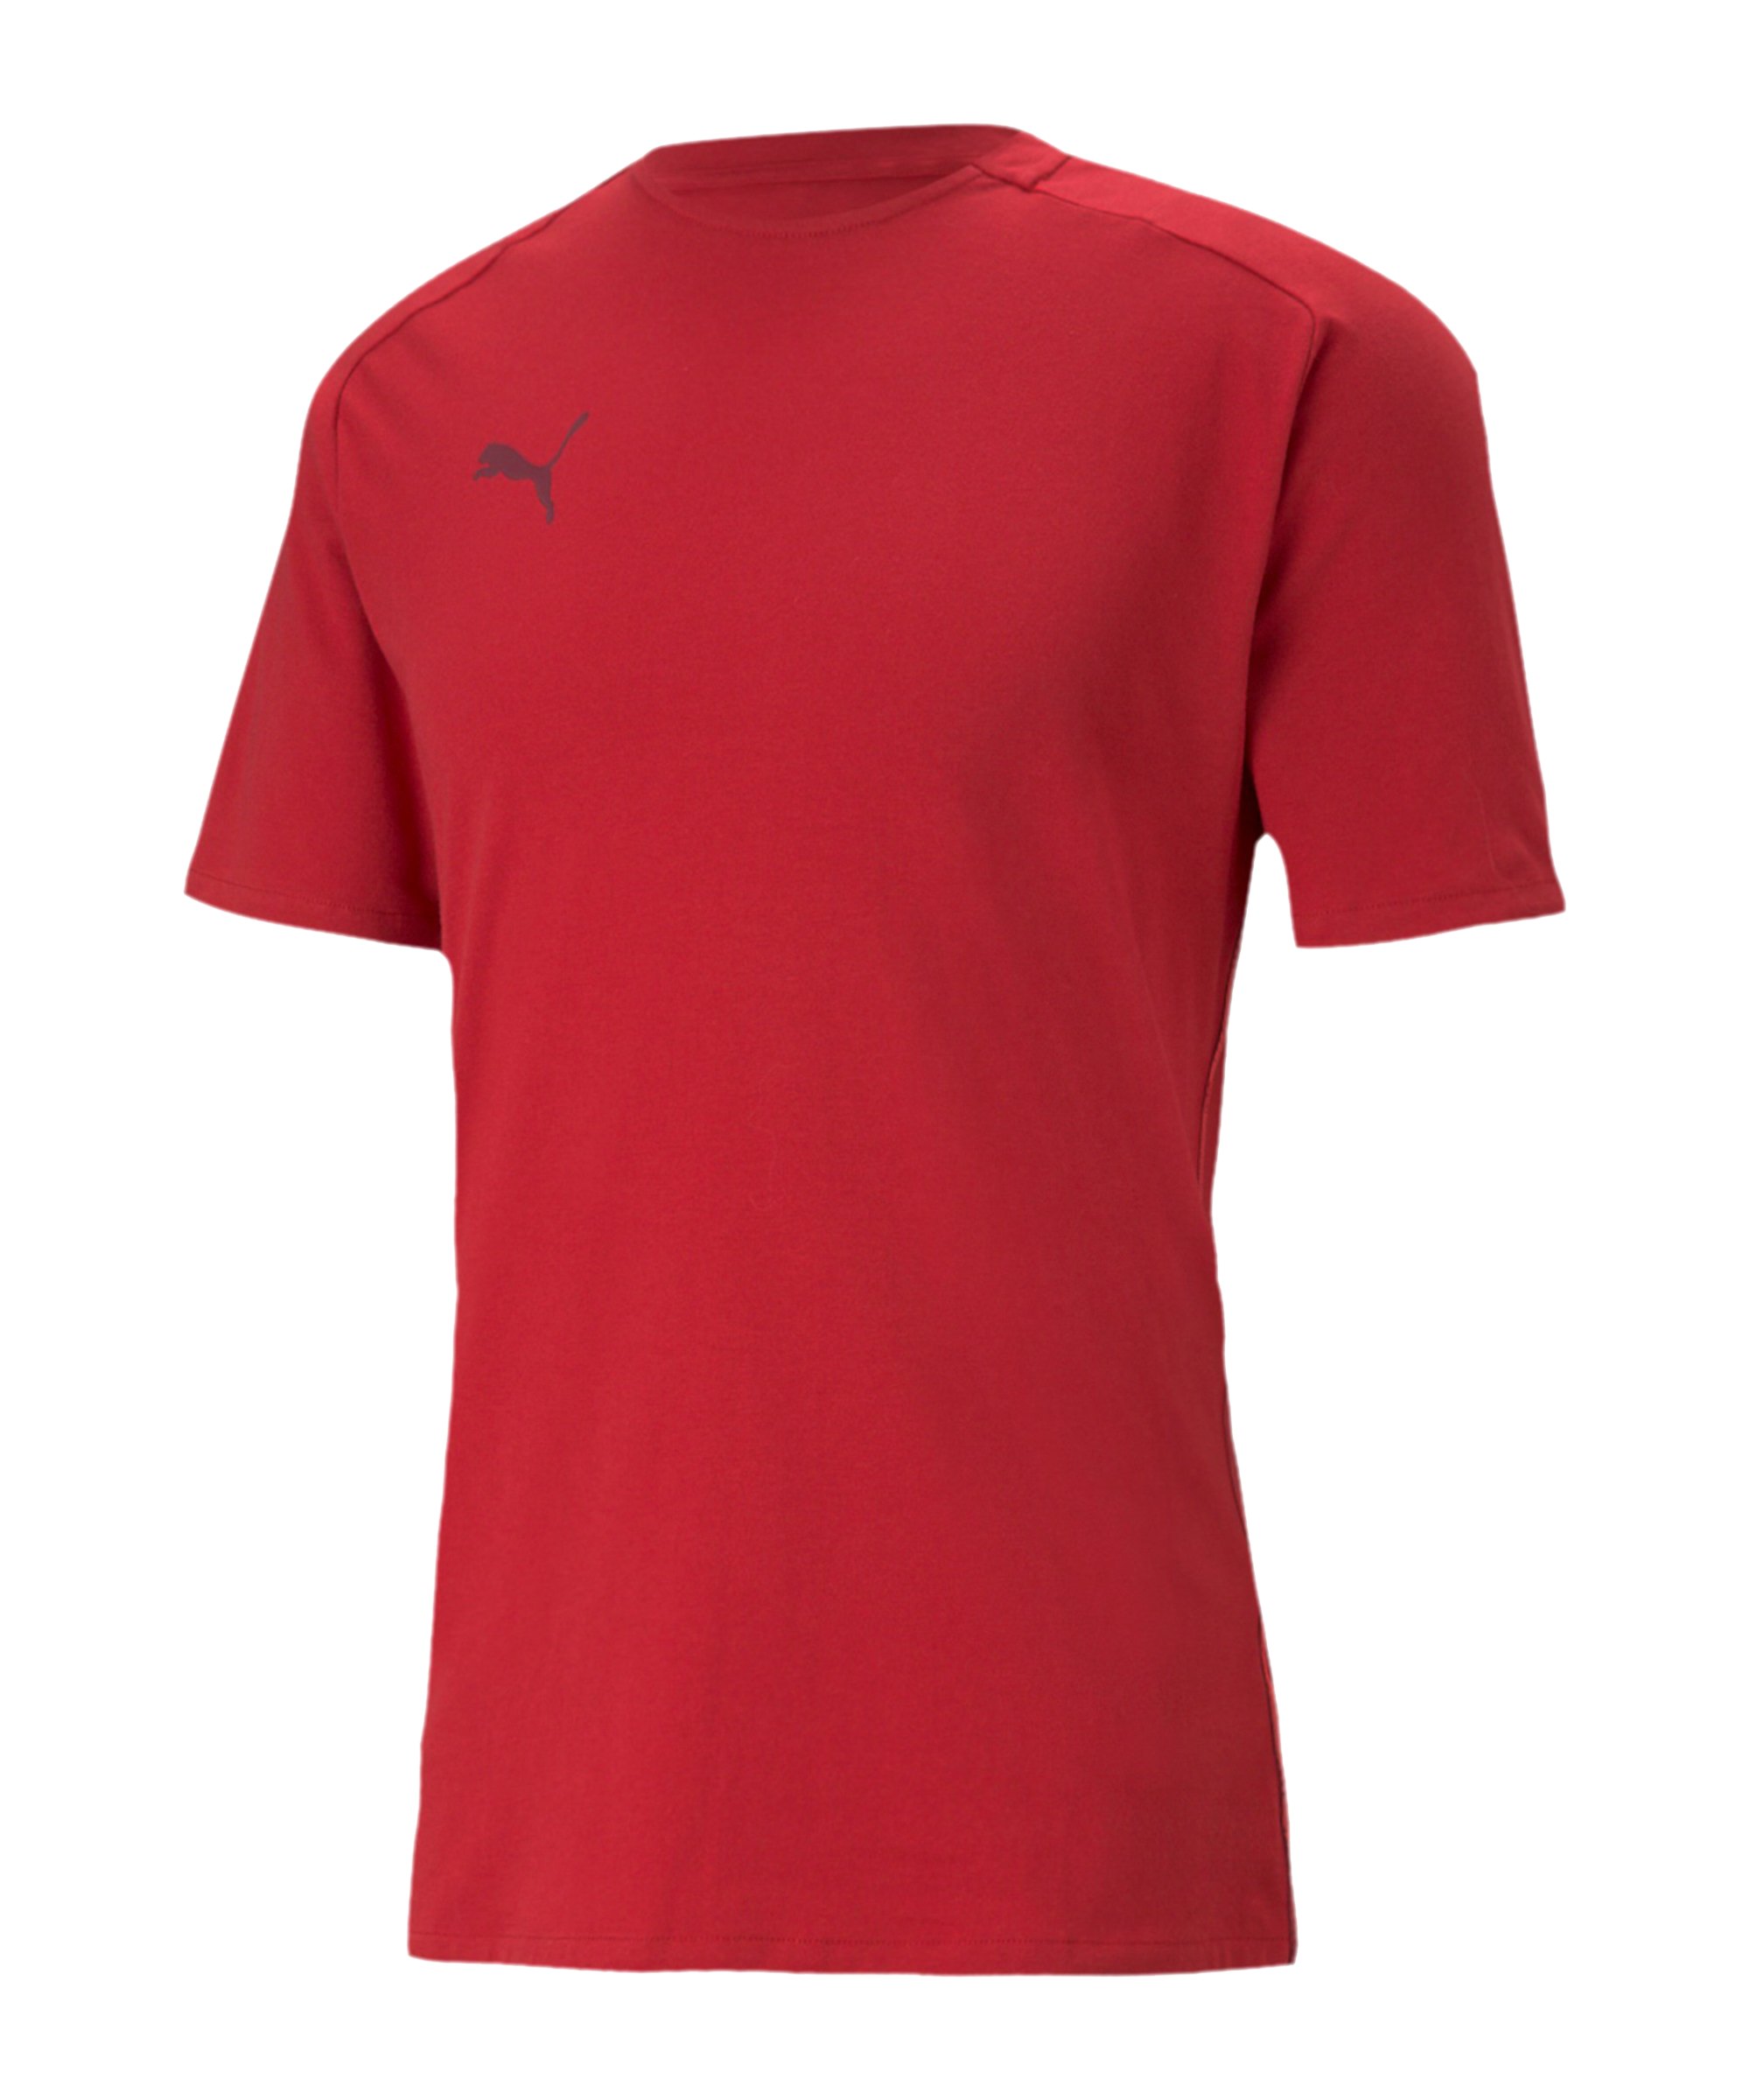 PUMA teamCUP Casuals T-Shirt Rot F01 - rot